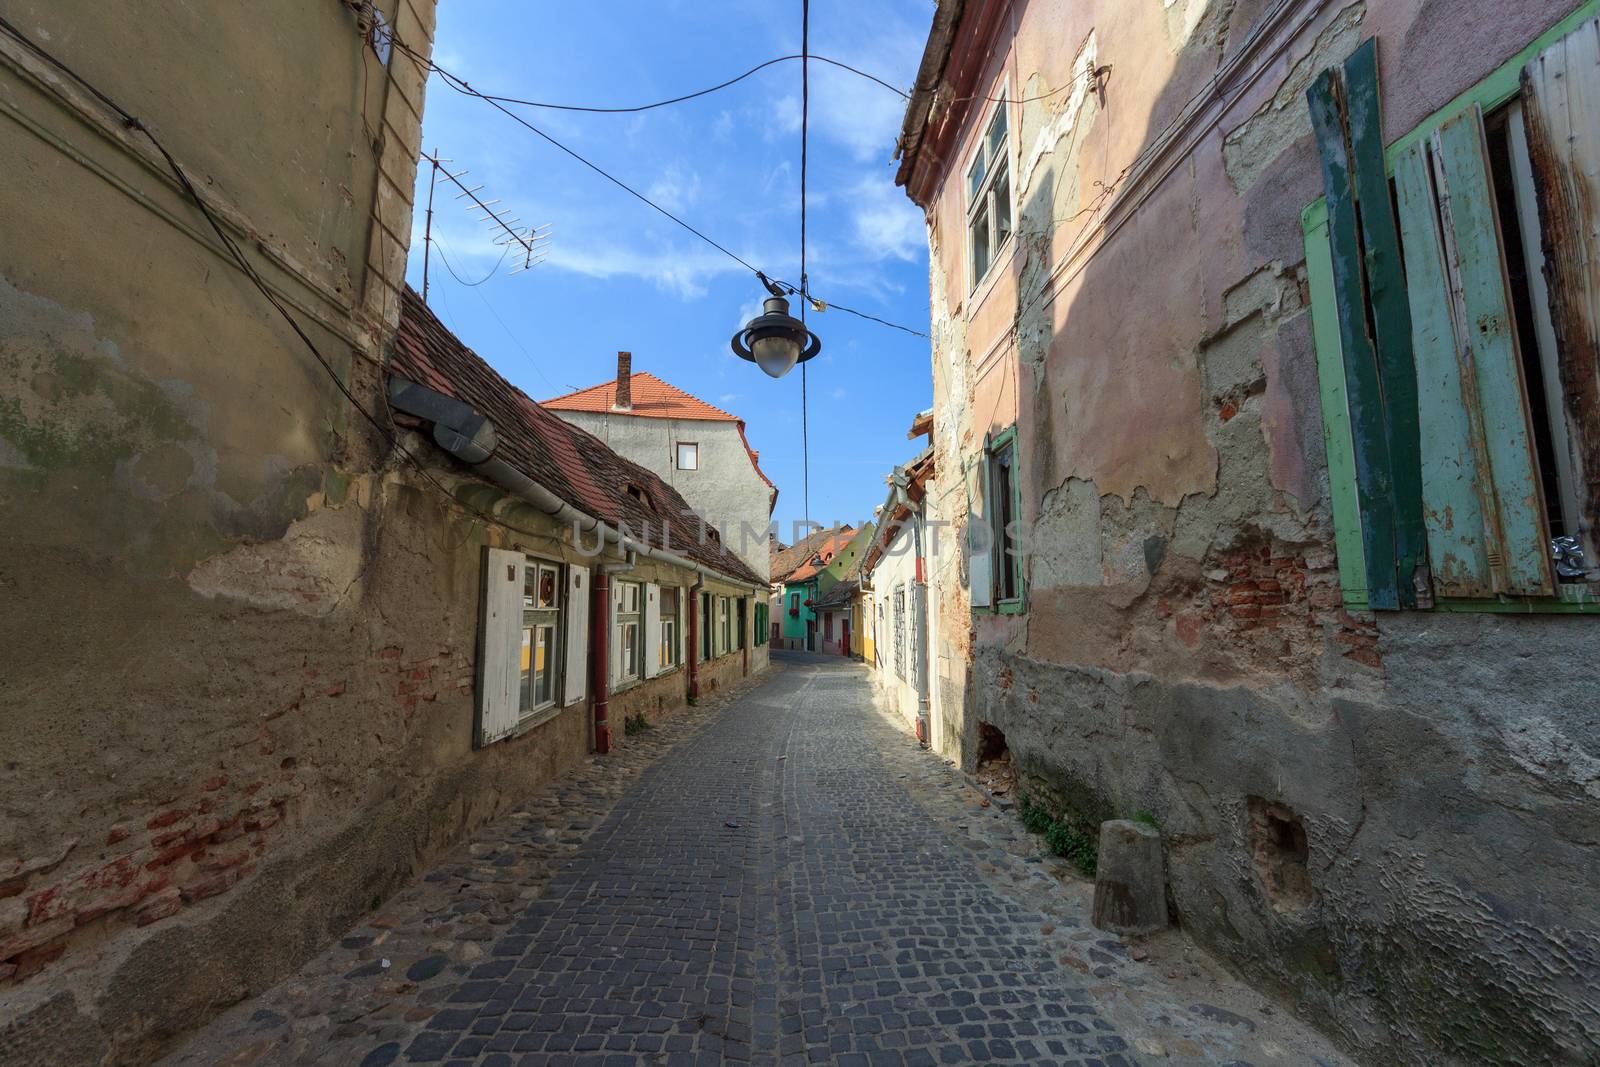 SIBIU, ROMANIA - Circa 2020: Old medieval town brick wall with cloudy blue sky. Beautiful tourist spot in eastern central Europe. Narrow old street with damaged houses. Damaged house concept. by dugulan